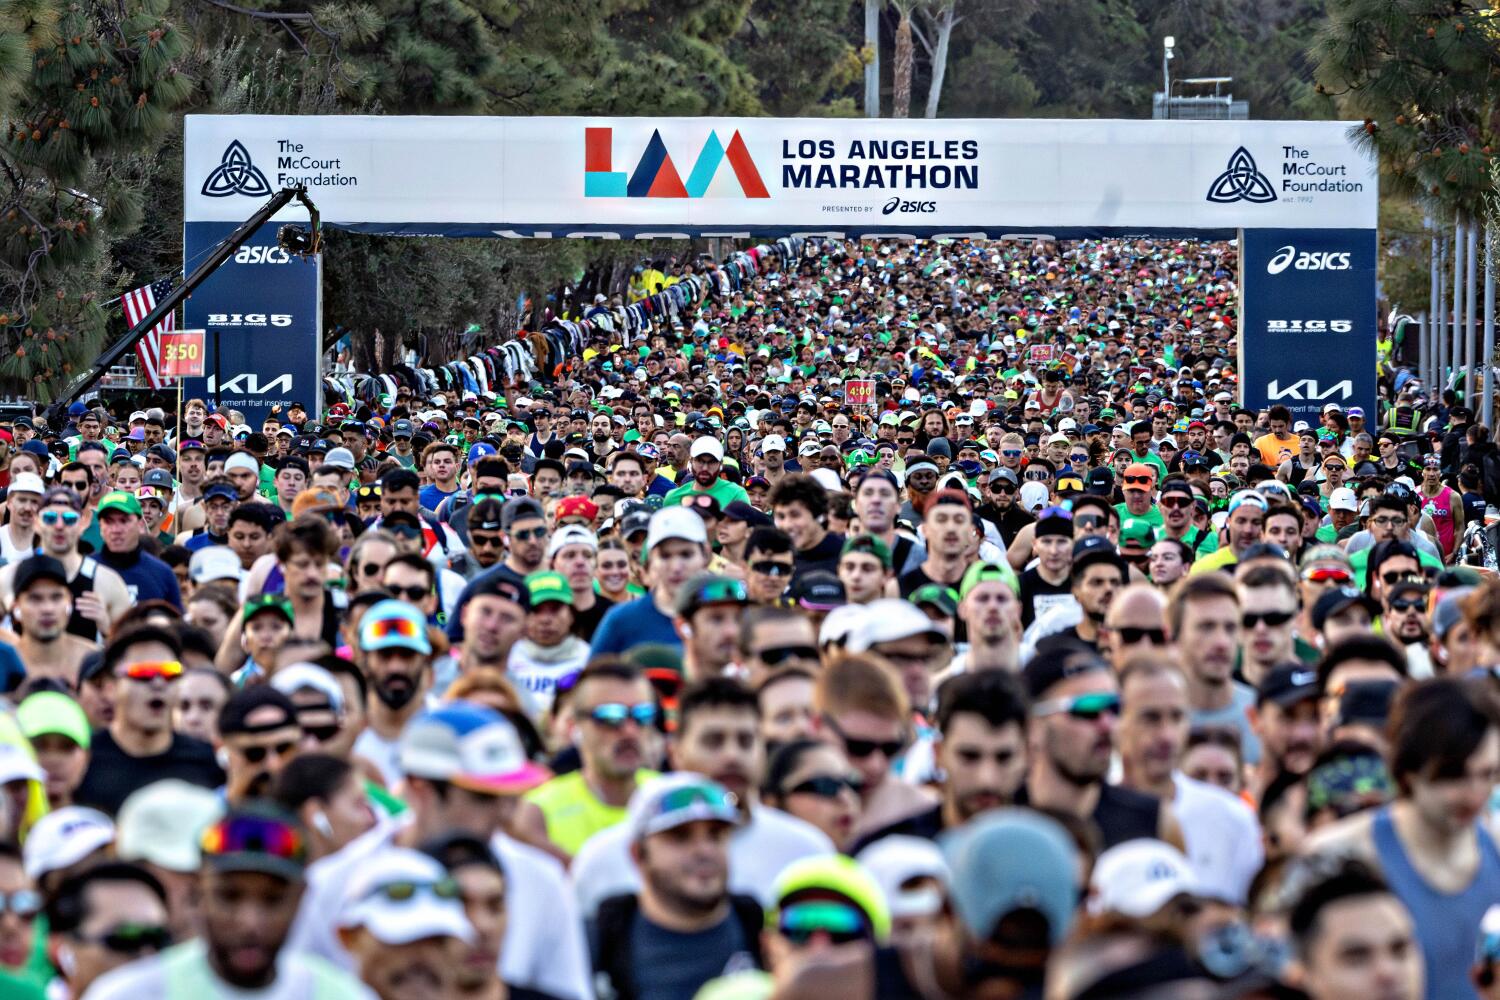 L.A. Marathon results: Check out the top finishers in the men's and women's fields